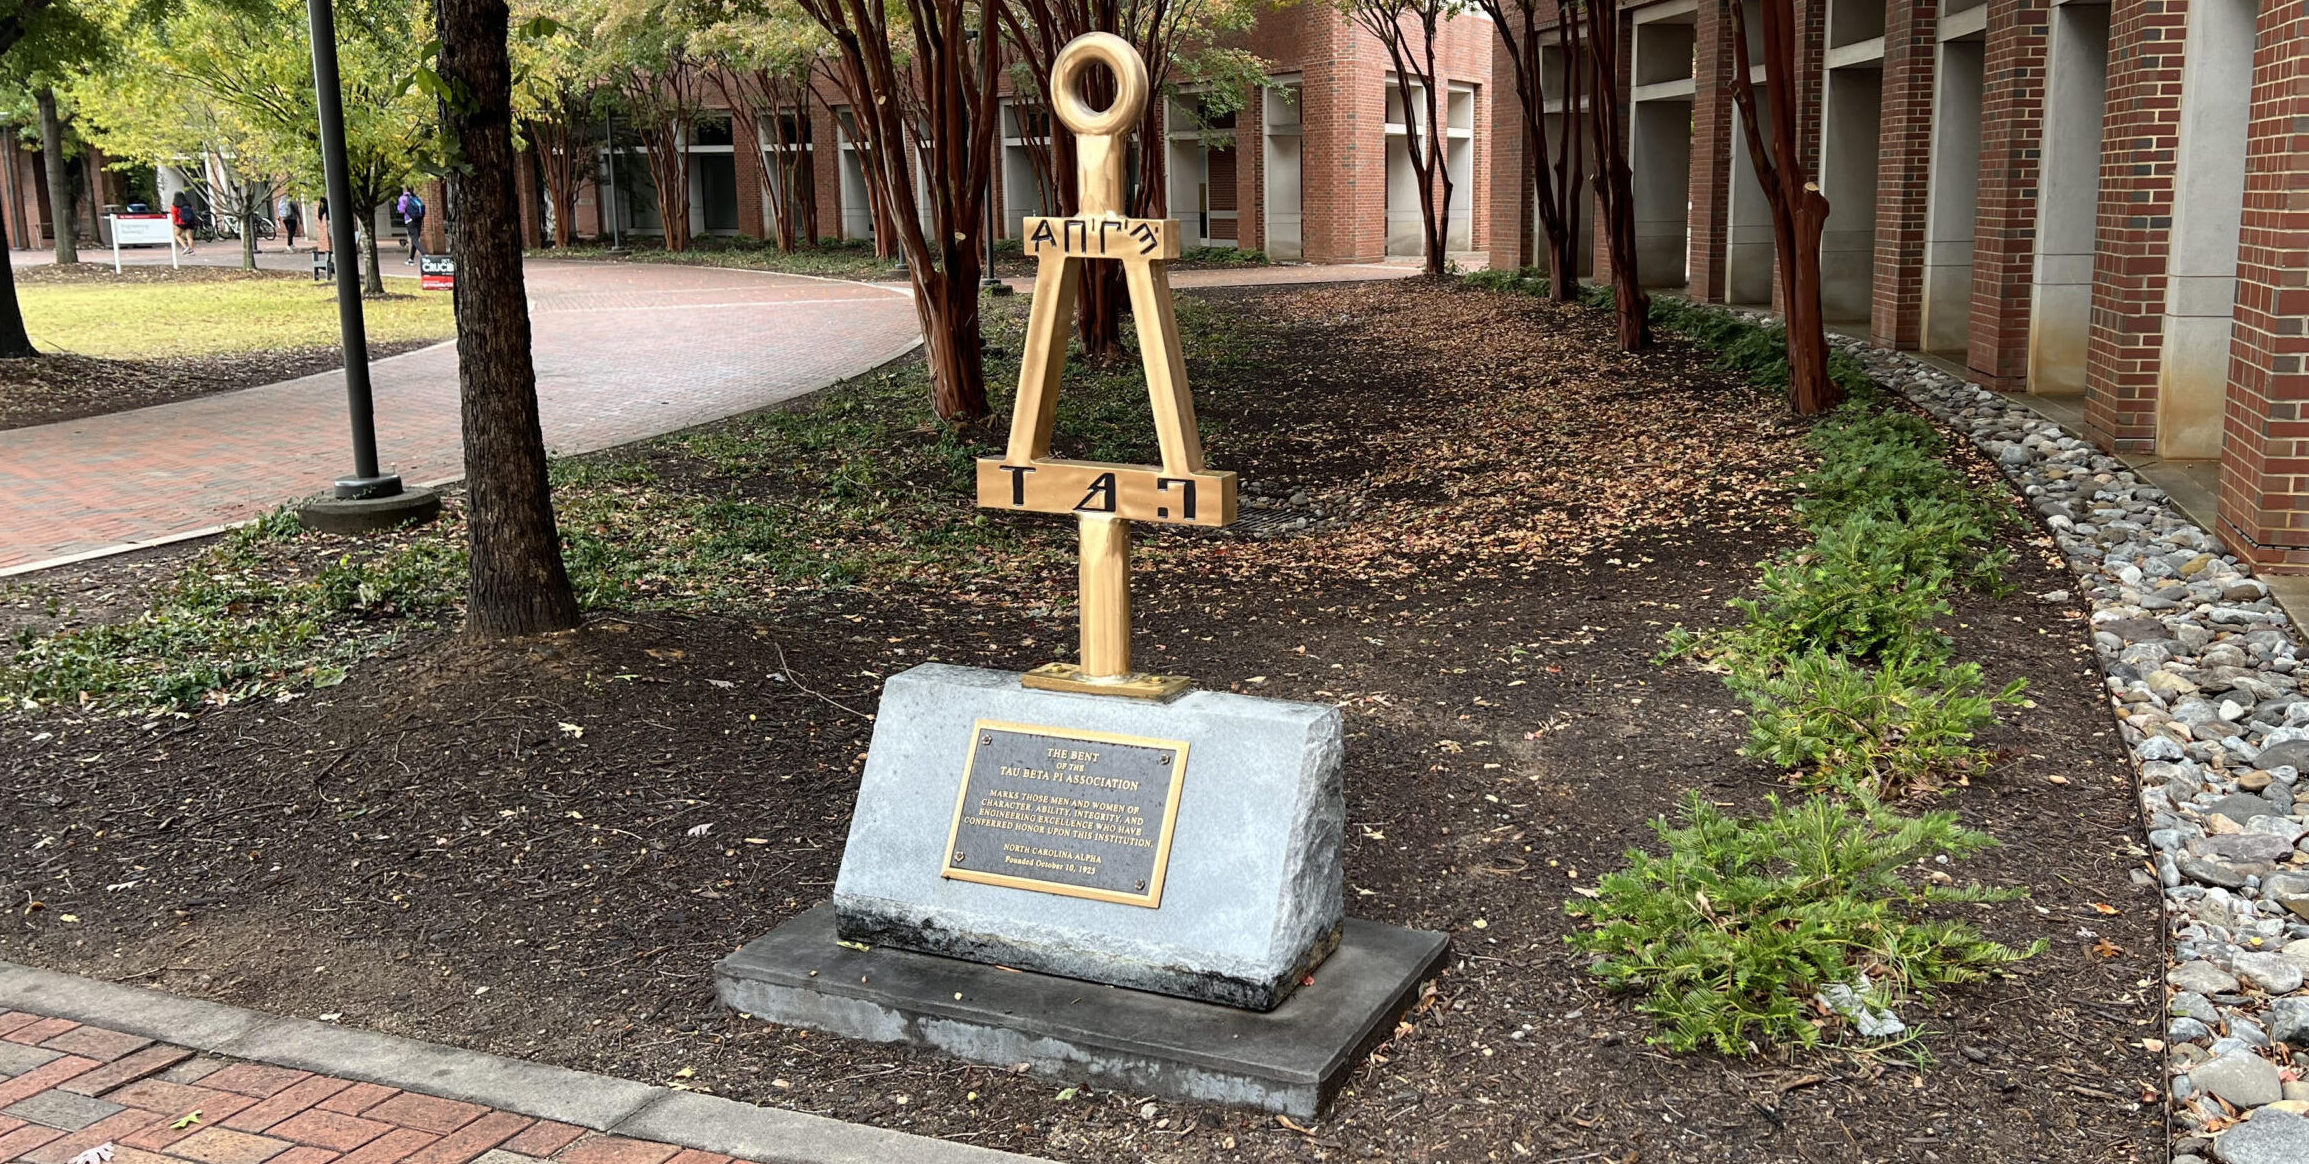 The Bent of The Tau Beta Pi Association on NC State's Campus